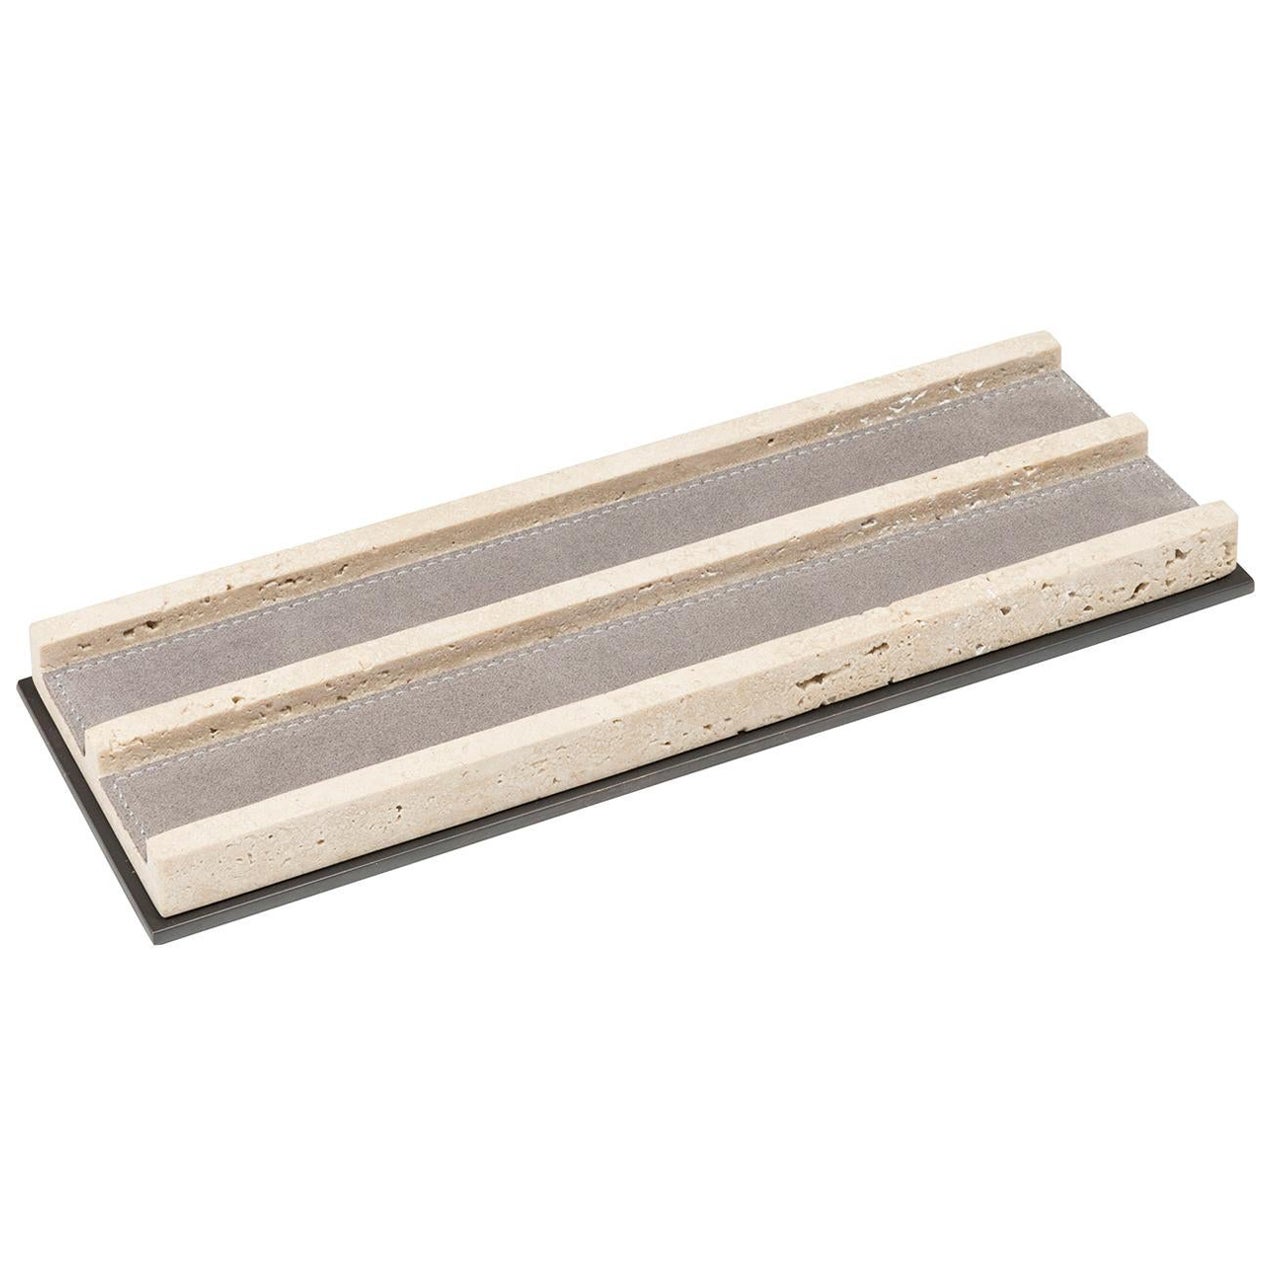 Latina Leather & Marble Valet Tray en vente